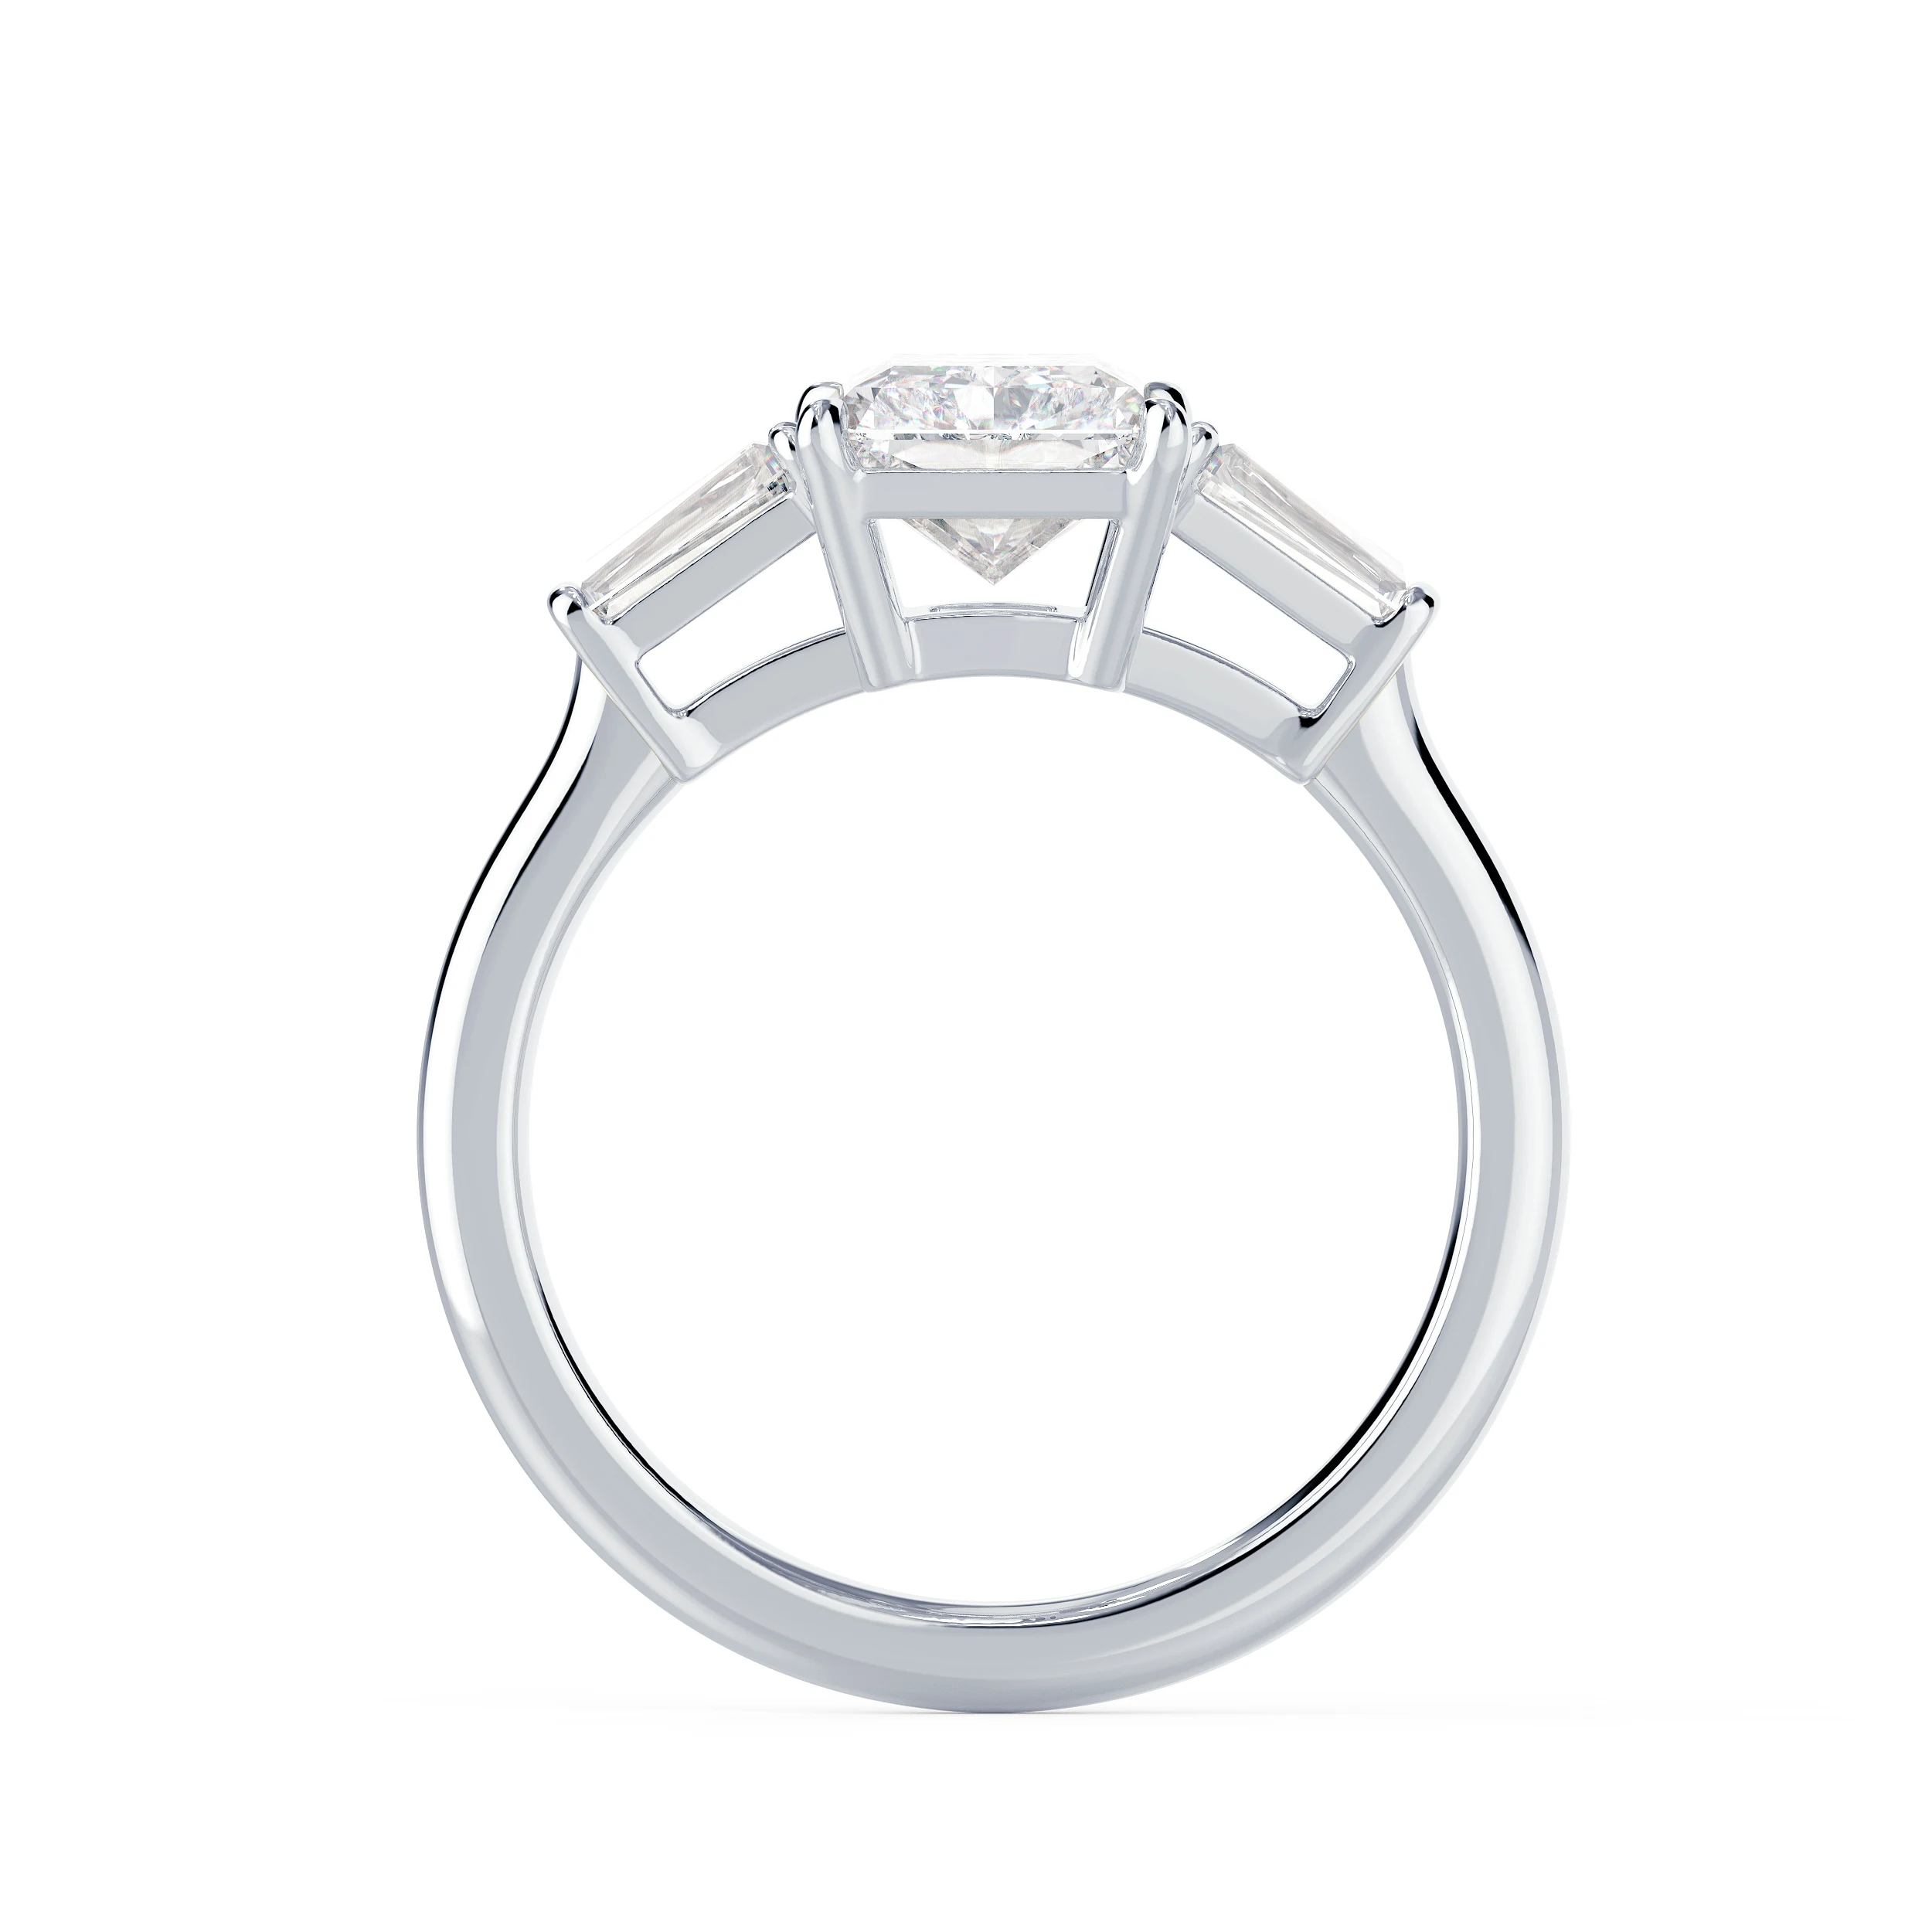 Exceptional Quality Lab Diamonds Radiant and Baguette Setting in White Gold (Profile View)